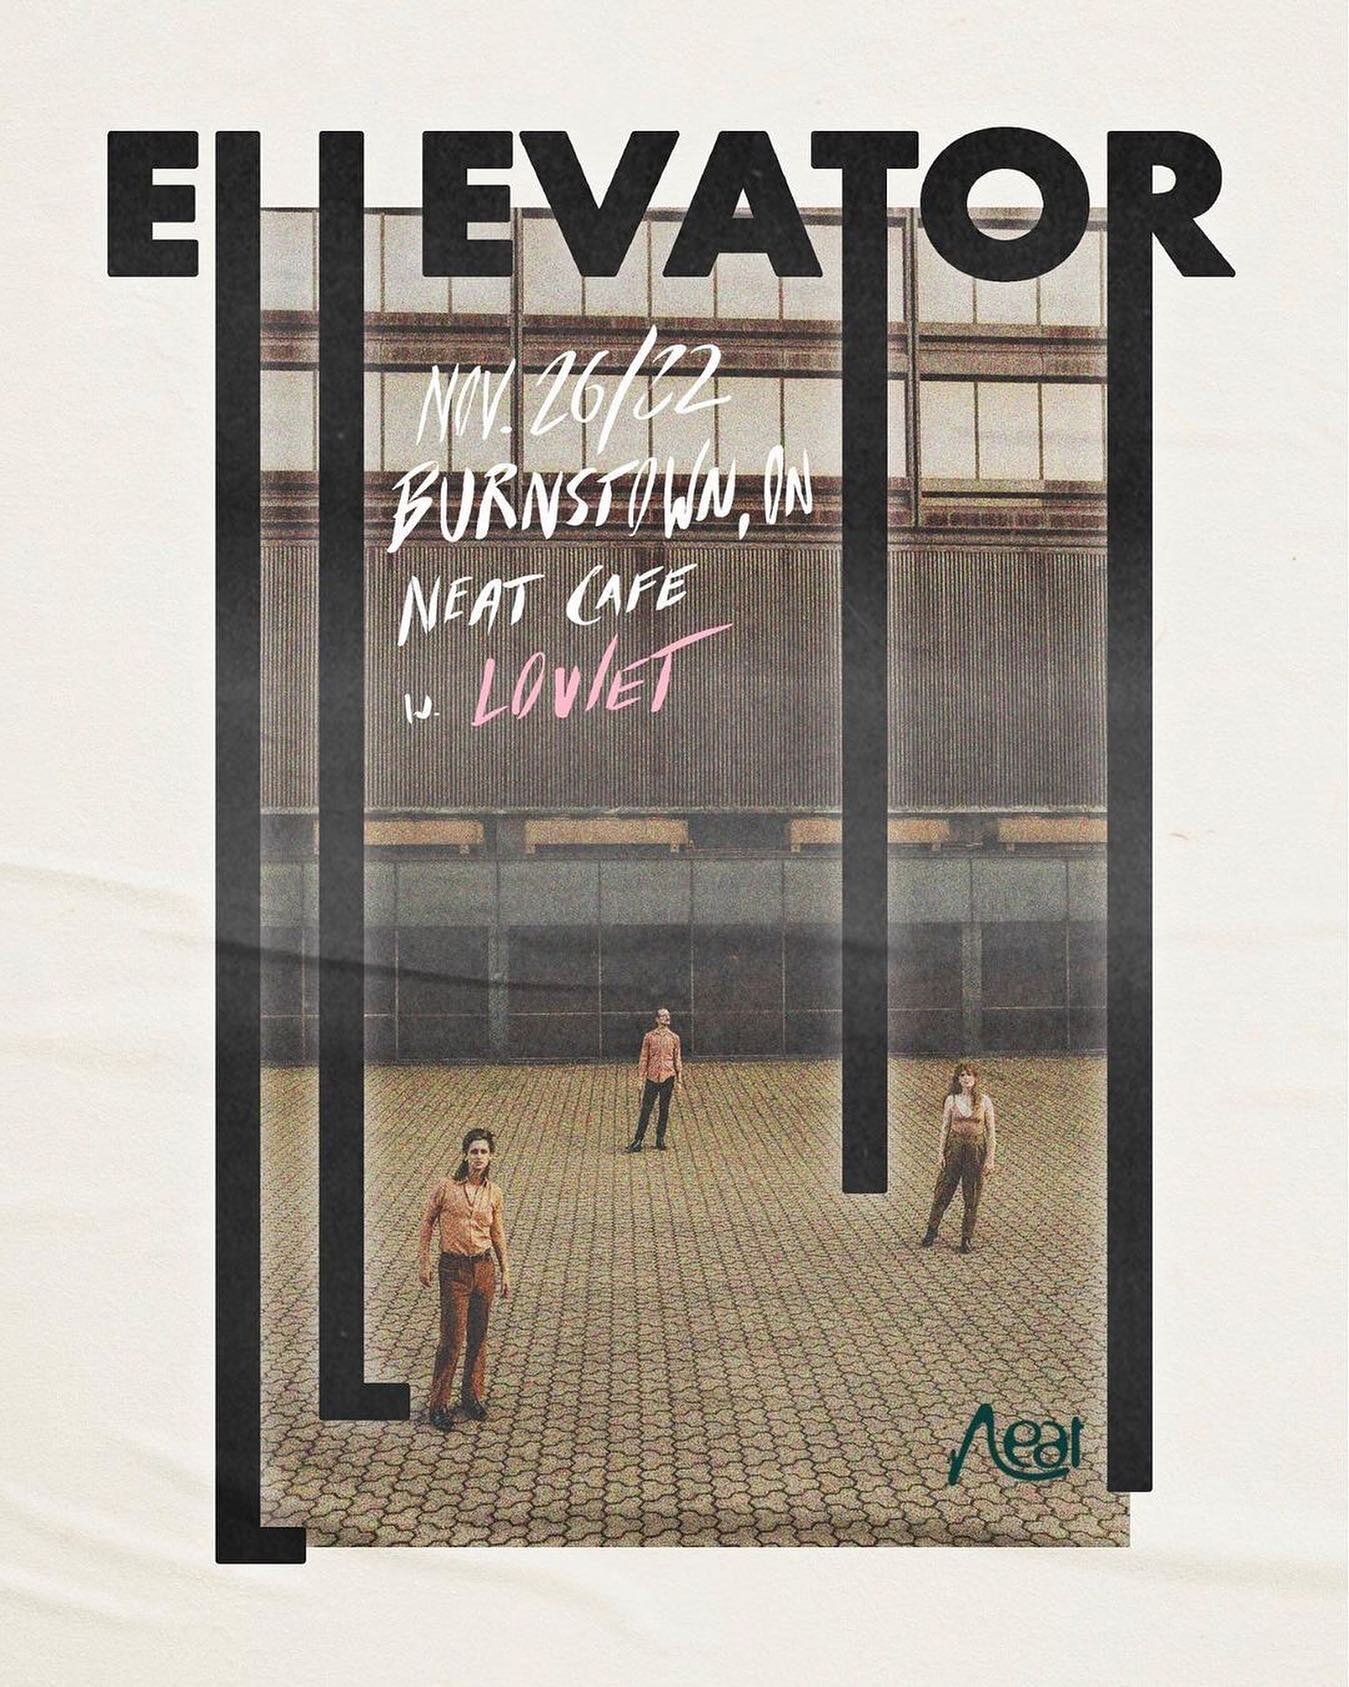 Ellevator are heading to the Neat Cafe 11.26:

📣via @neatcafe We are stoked to announce @ellevatorband will hit our intimate indoor stage November 26th along with special guest @lovietmusic 😎 Tickets on sale now!
#neatcoffeeshop #burnstown #ontario